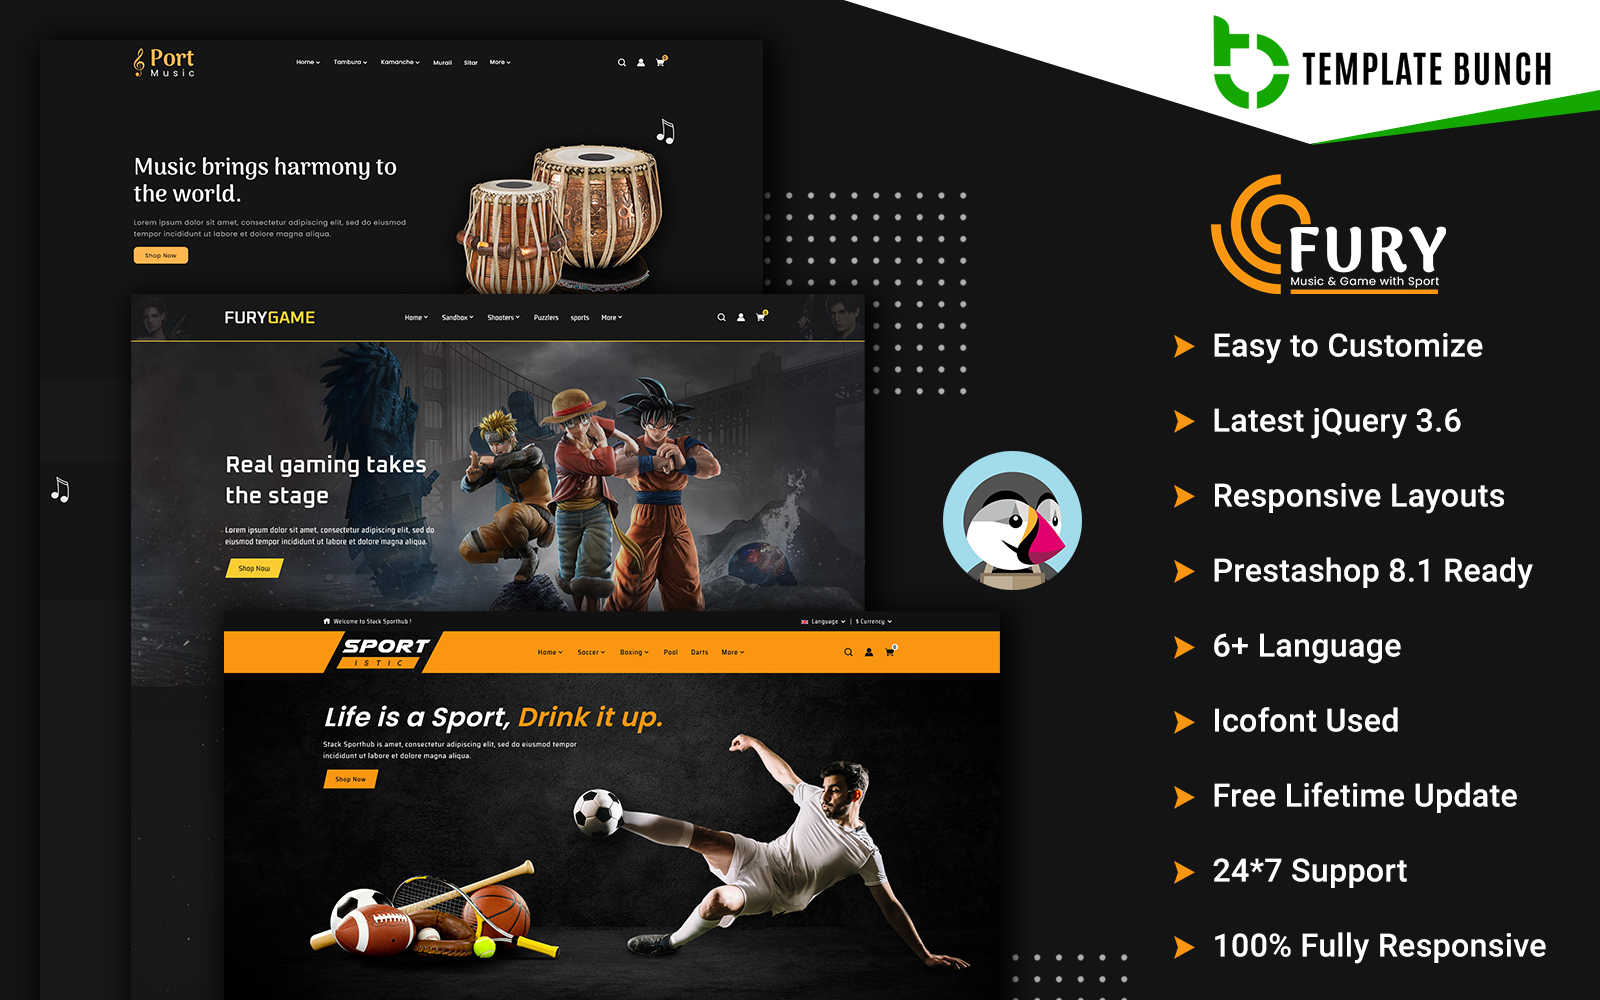 Fury - Music and Game with Sport - Responsive Prestashop Theme for eCommerce